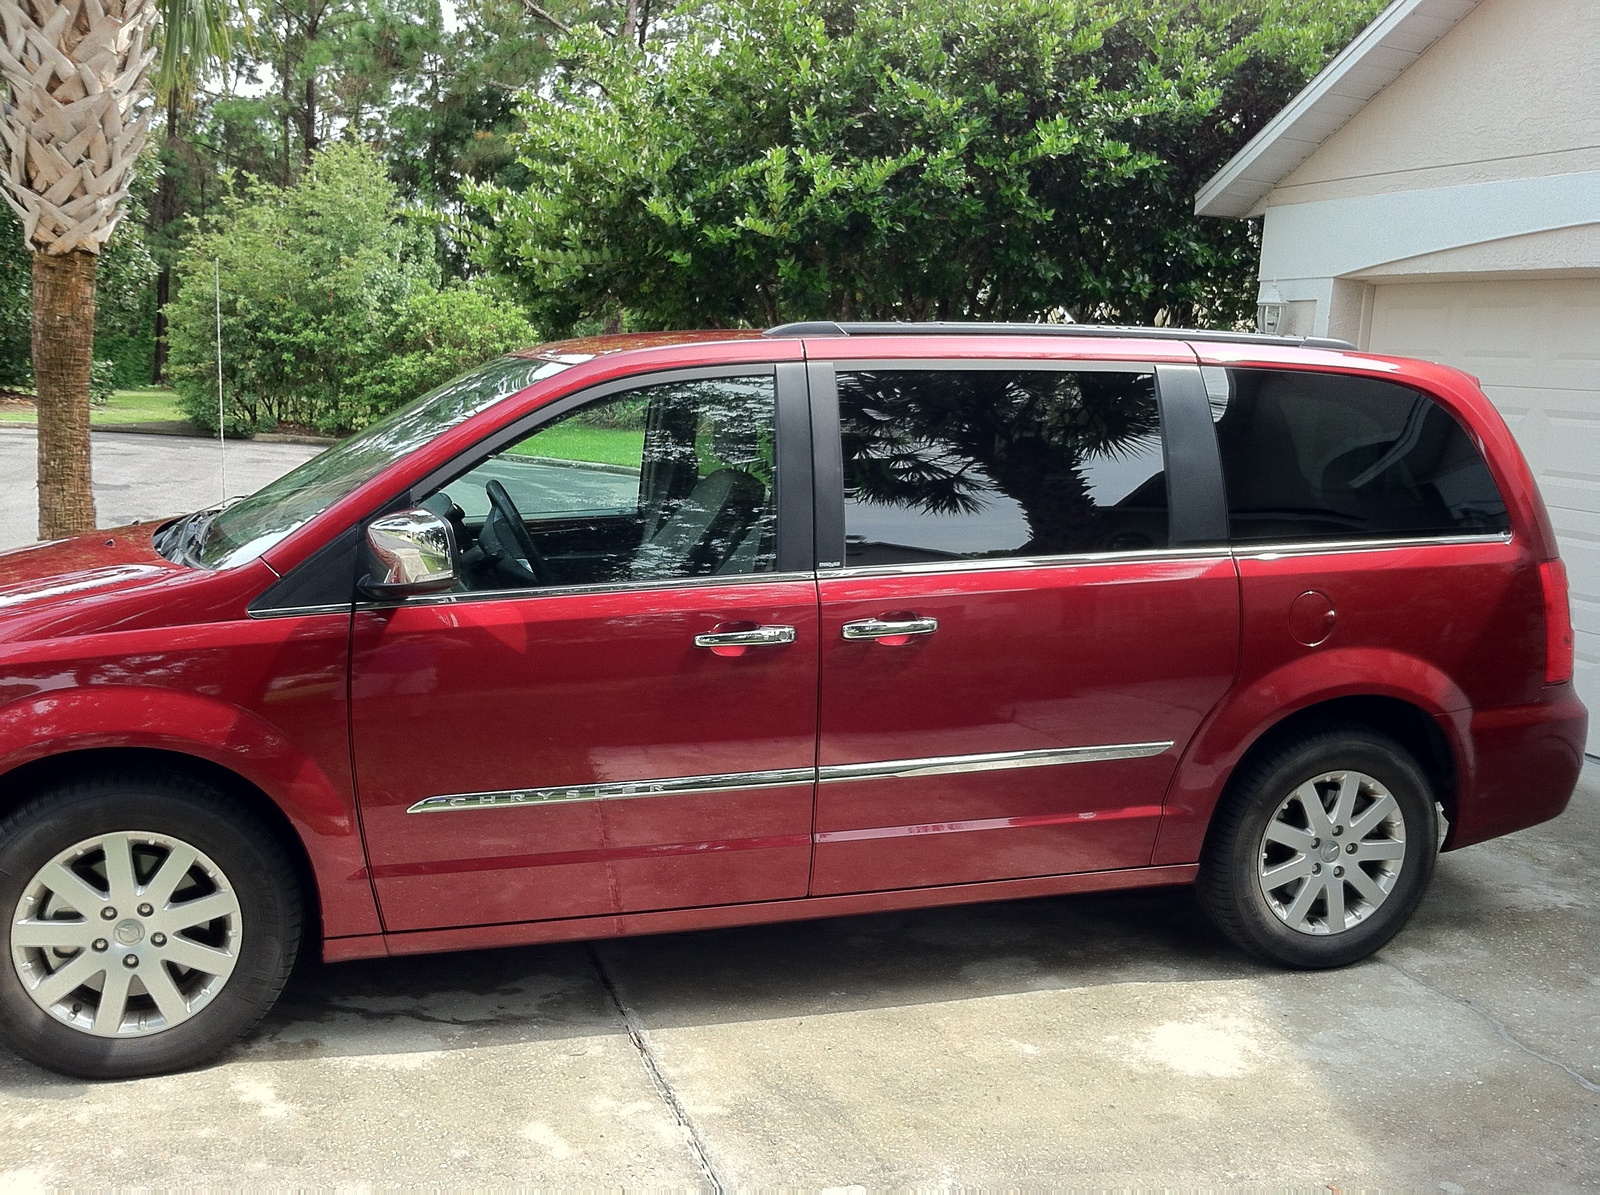 2012 Chrysler town and country touring limited #2